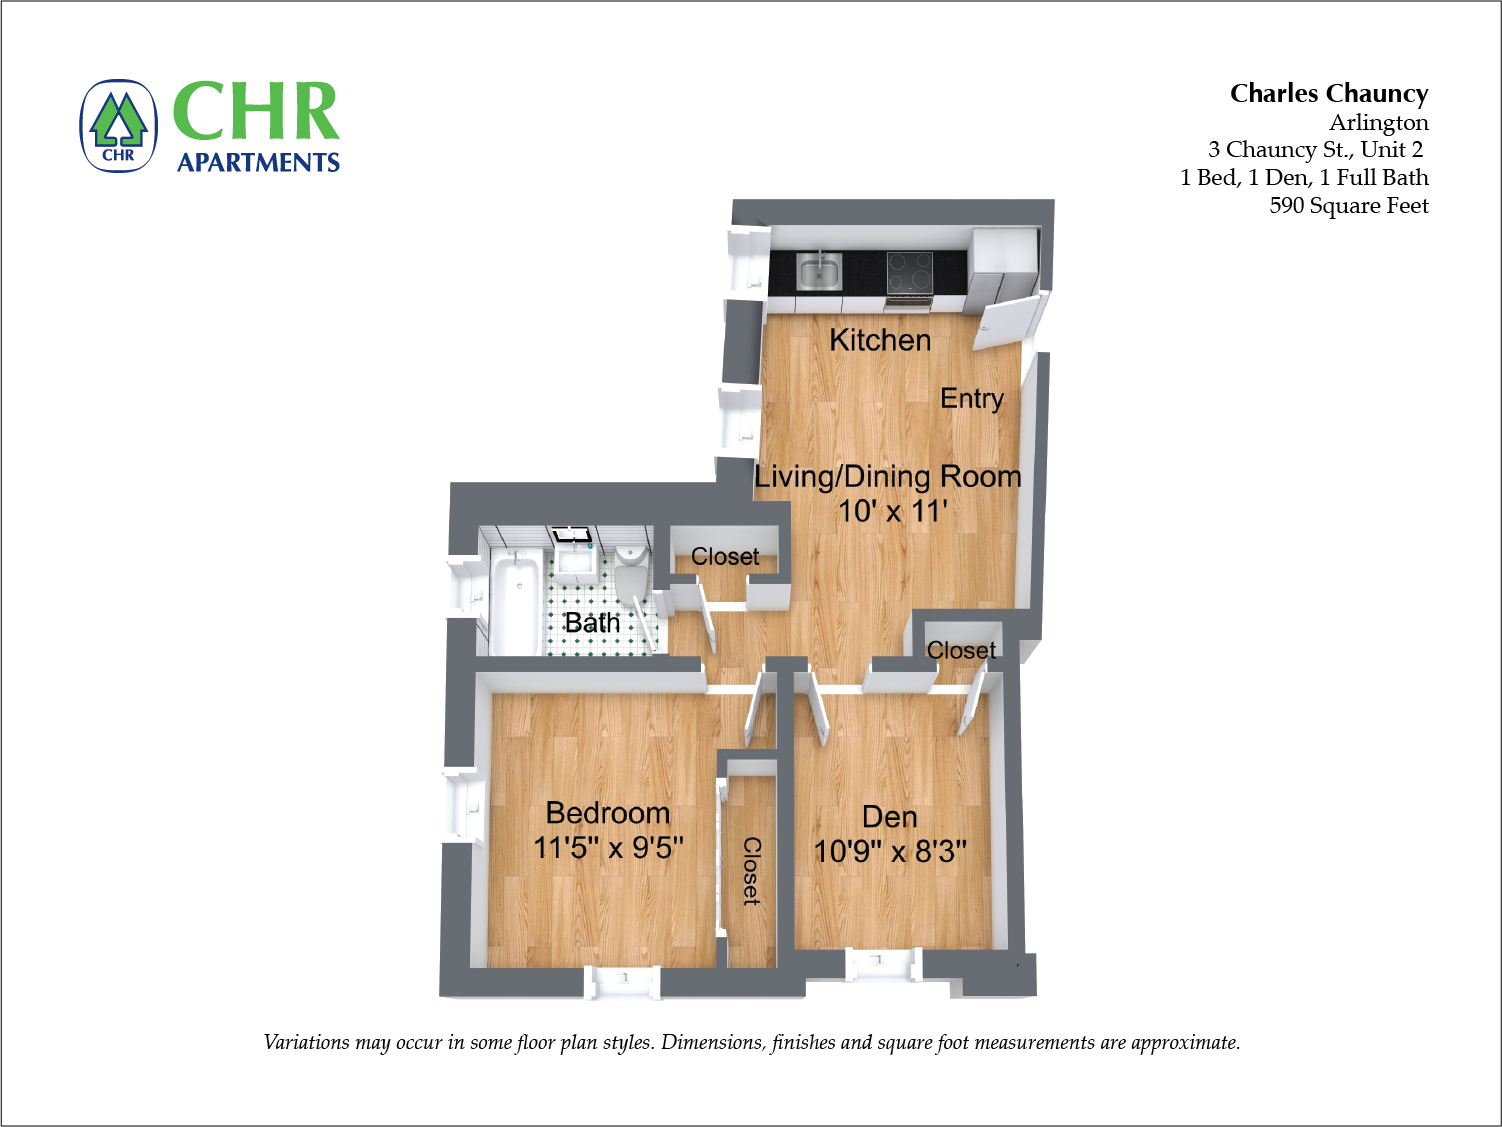 Click to view Charles Chauncy - 2 Bedroom (Newly Renovated) floor plan gallery